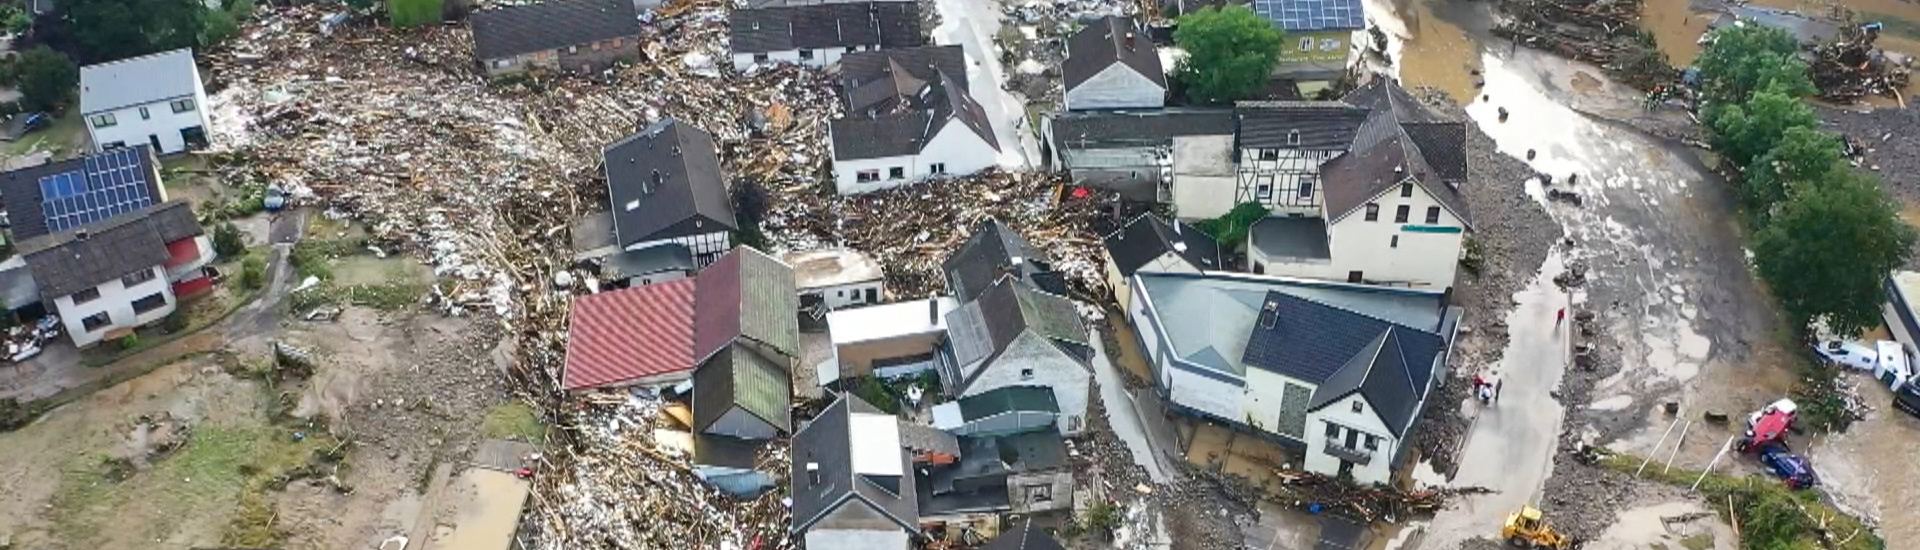 Destroyed Area after floods in Germany: Donate now